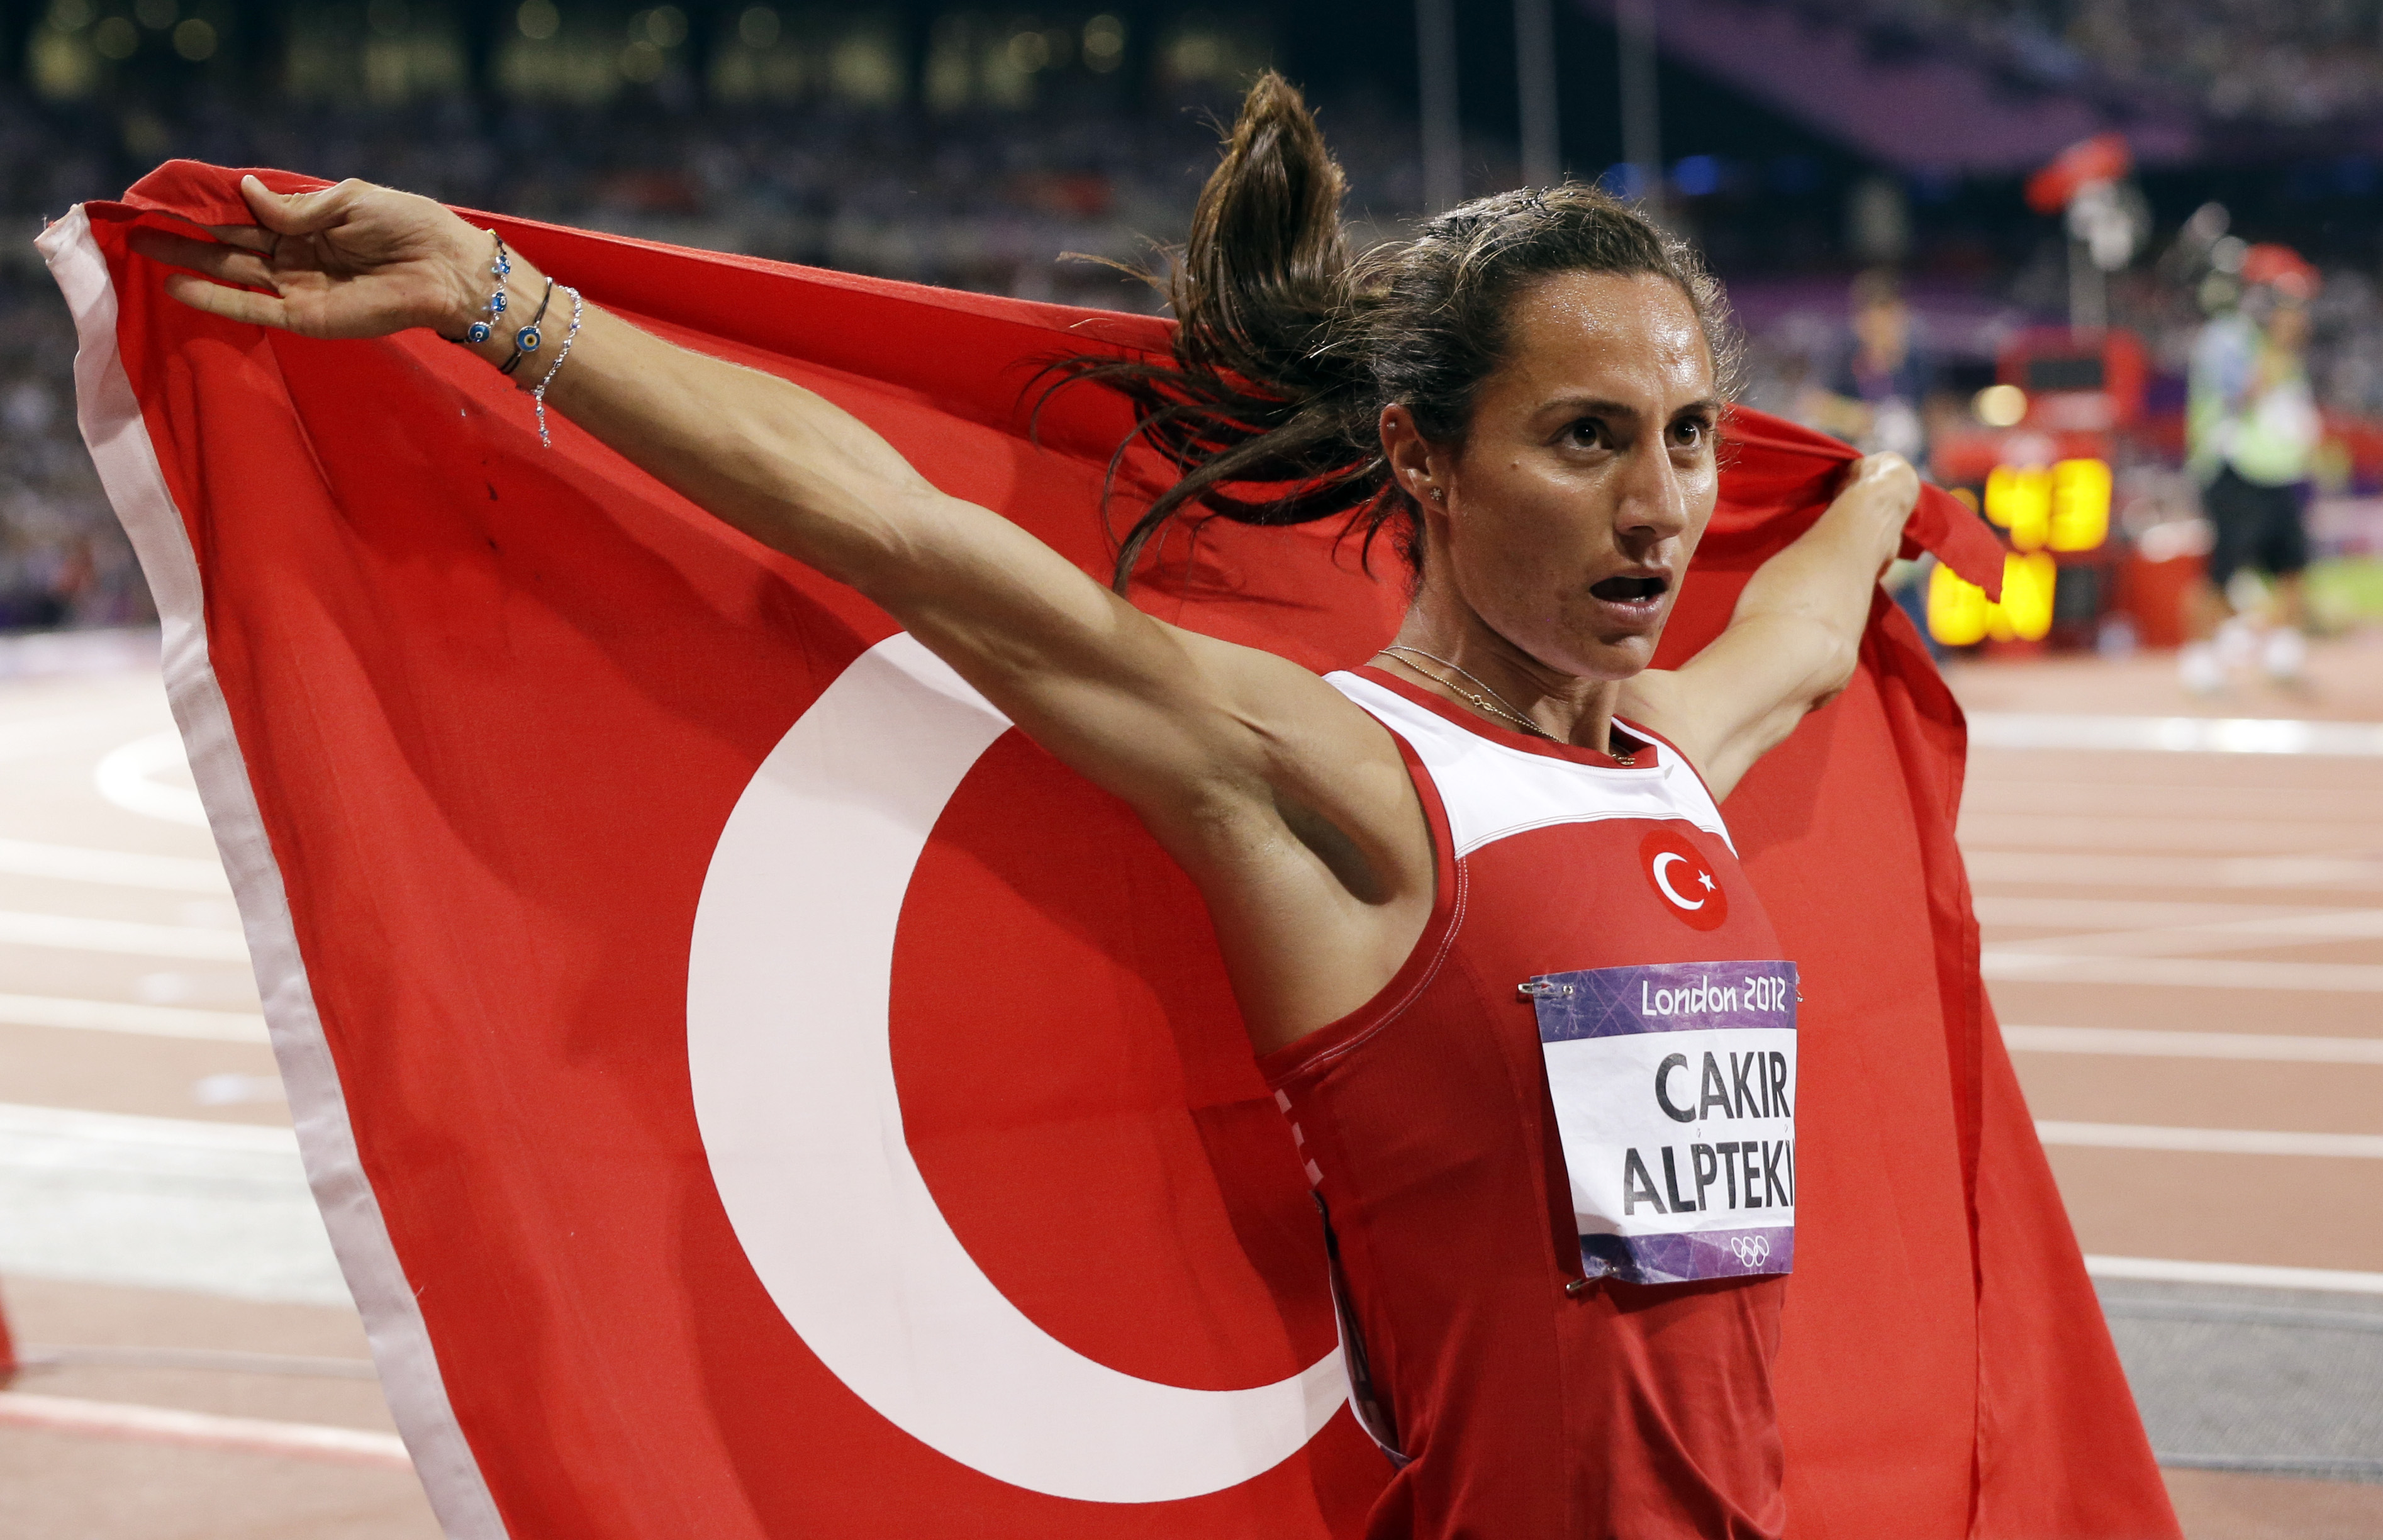 Asli Cakir Alptekin celebrates after winning the women's 1,500 metres gold medal at the 2012 London Olympic Games. She has been stripped of the medal and banned for eight years for doping. Photos: AP